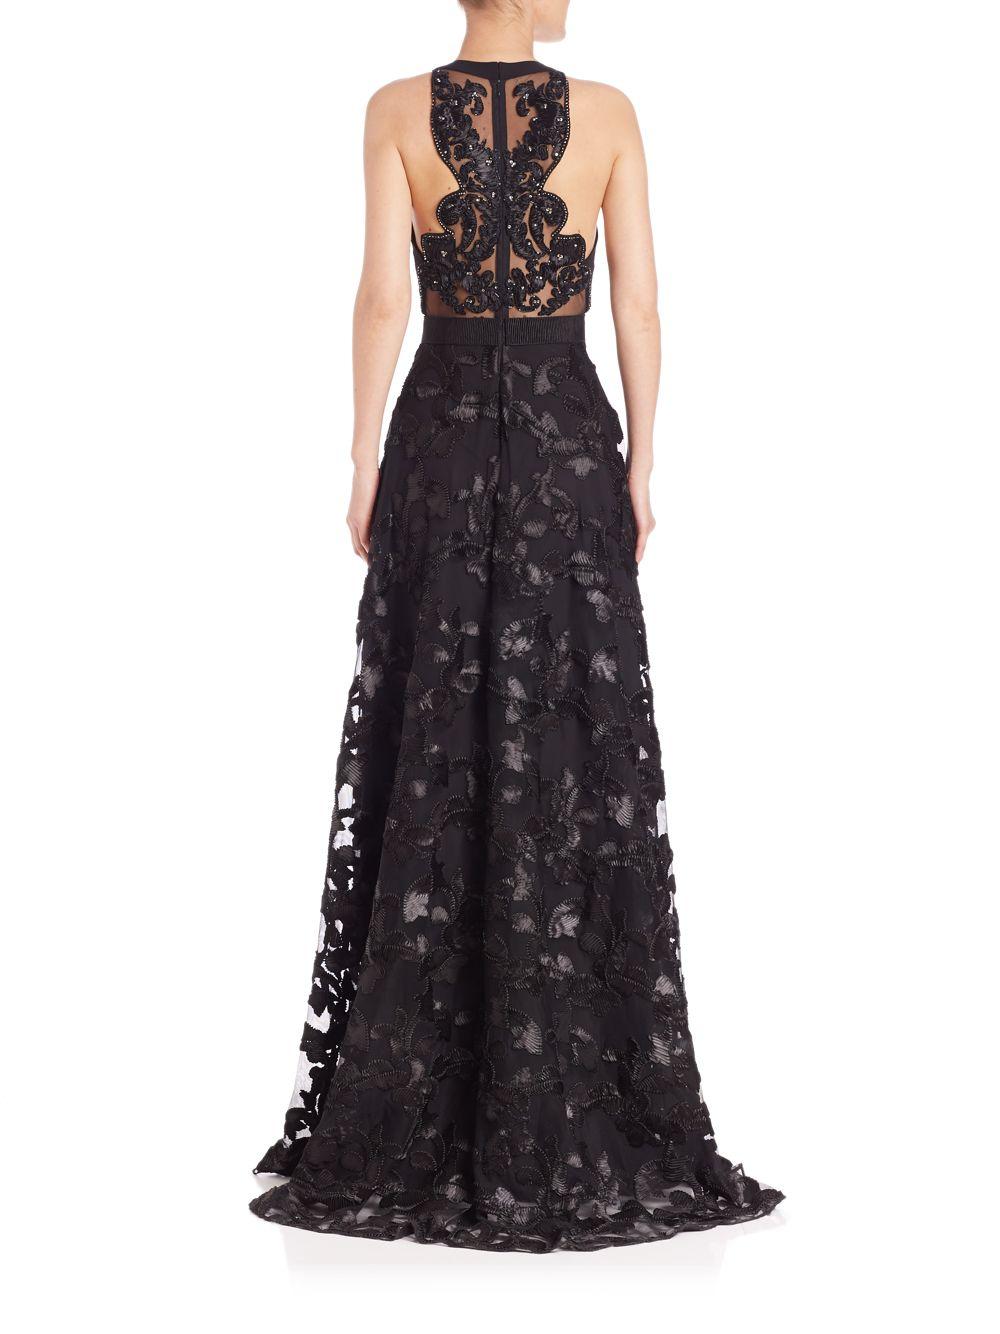 Lyst - Badgley Mischka Embroidered Ball Gown in Black